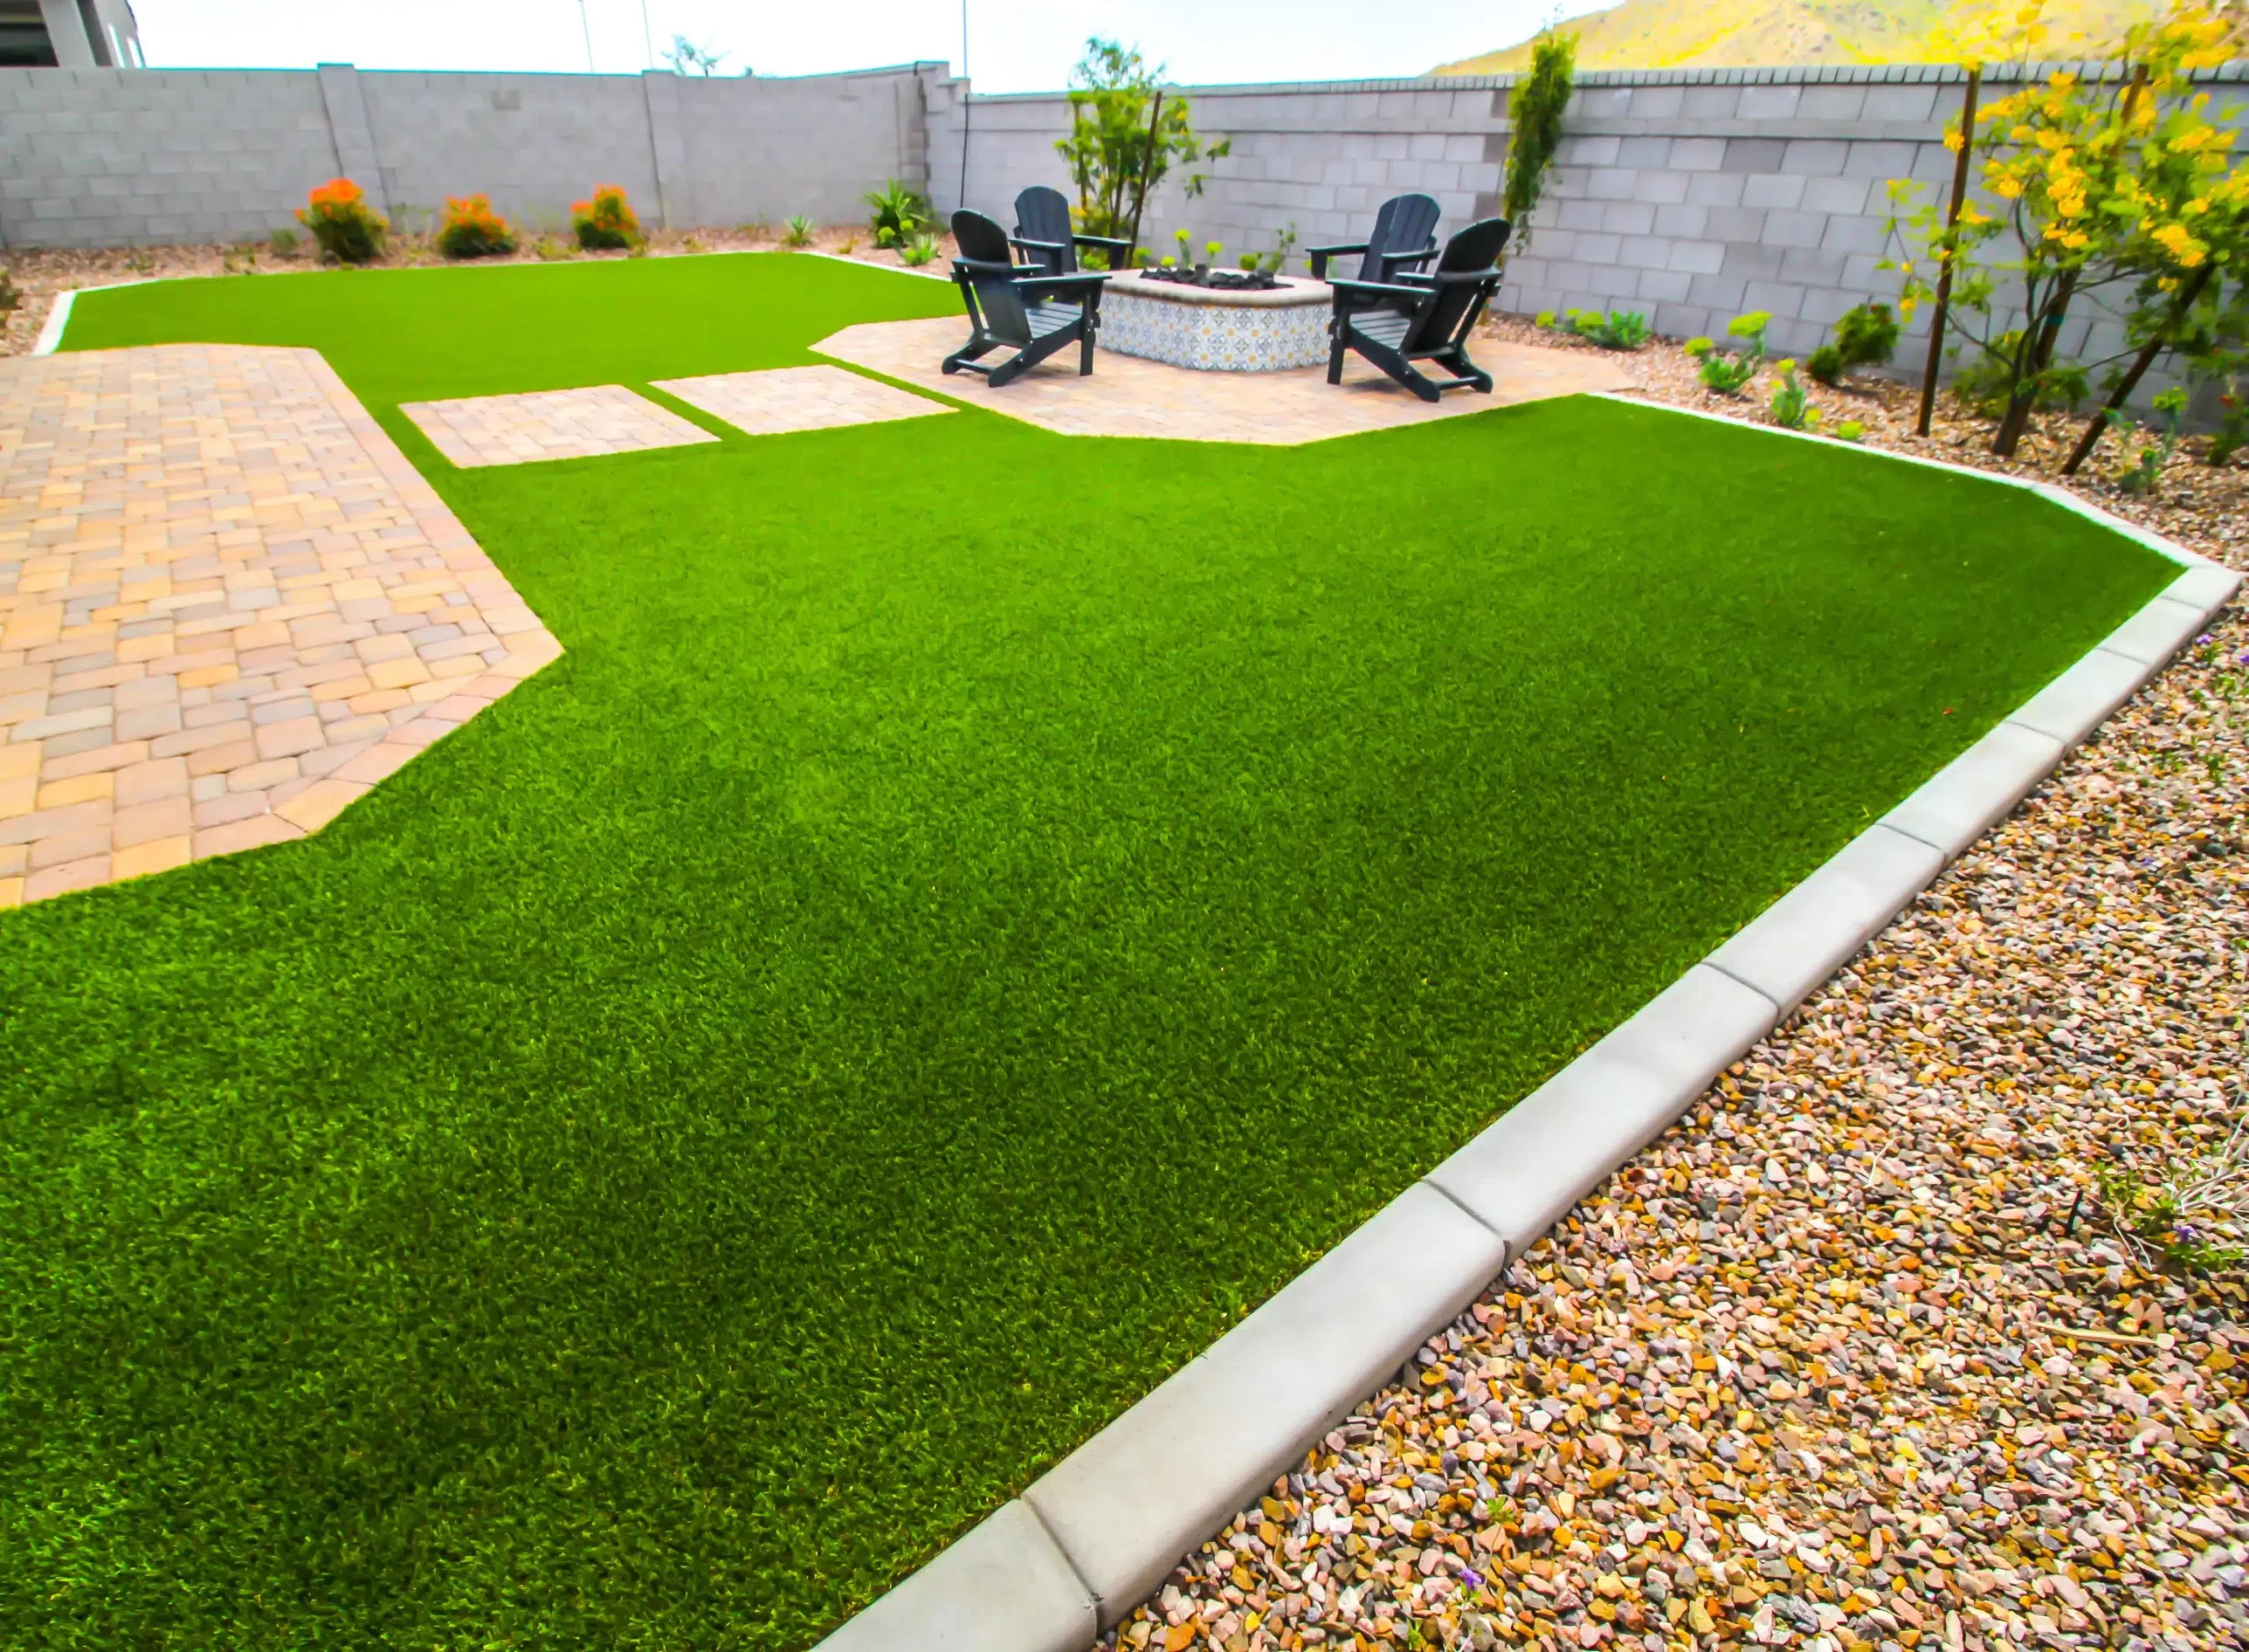 Tips for Installing Artificial Turf in Your Outdoor Space